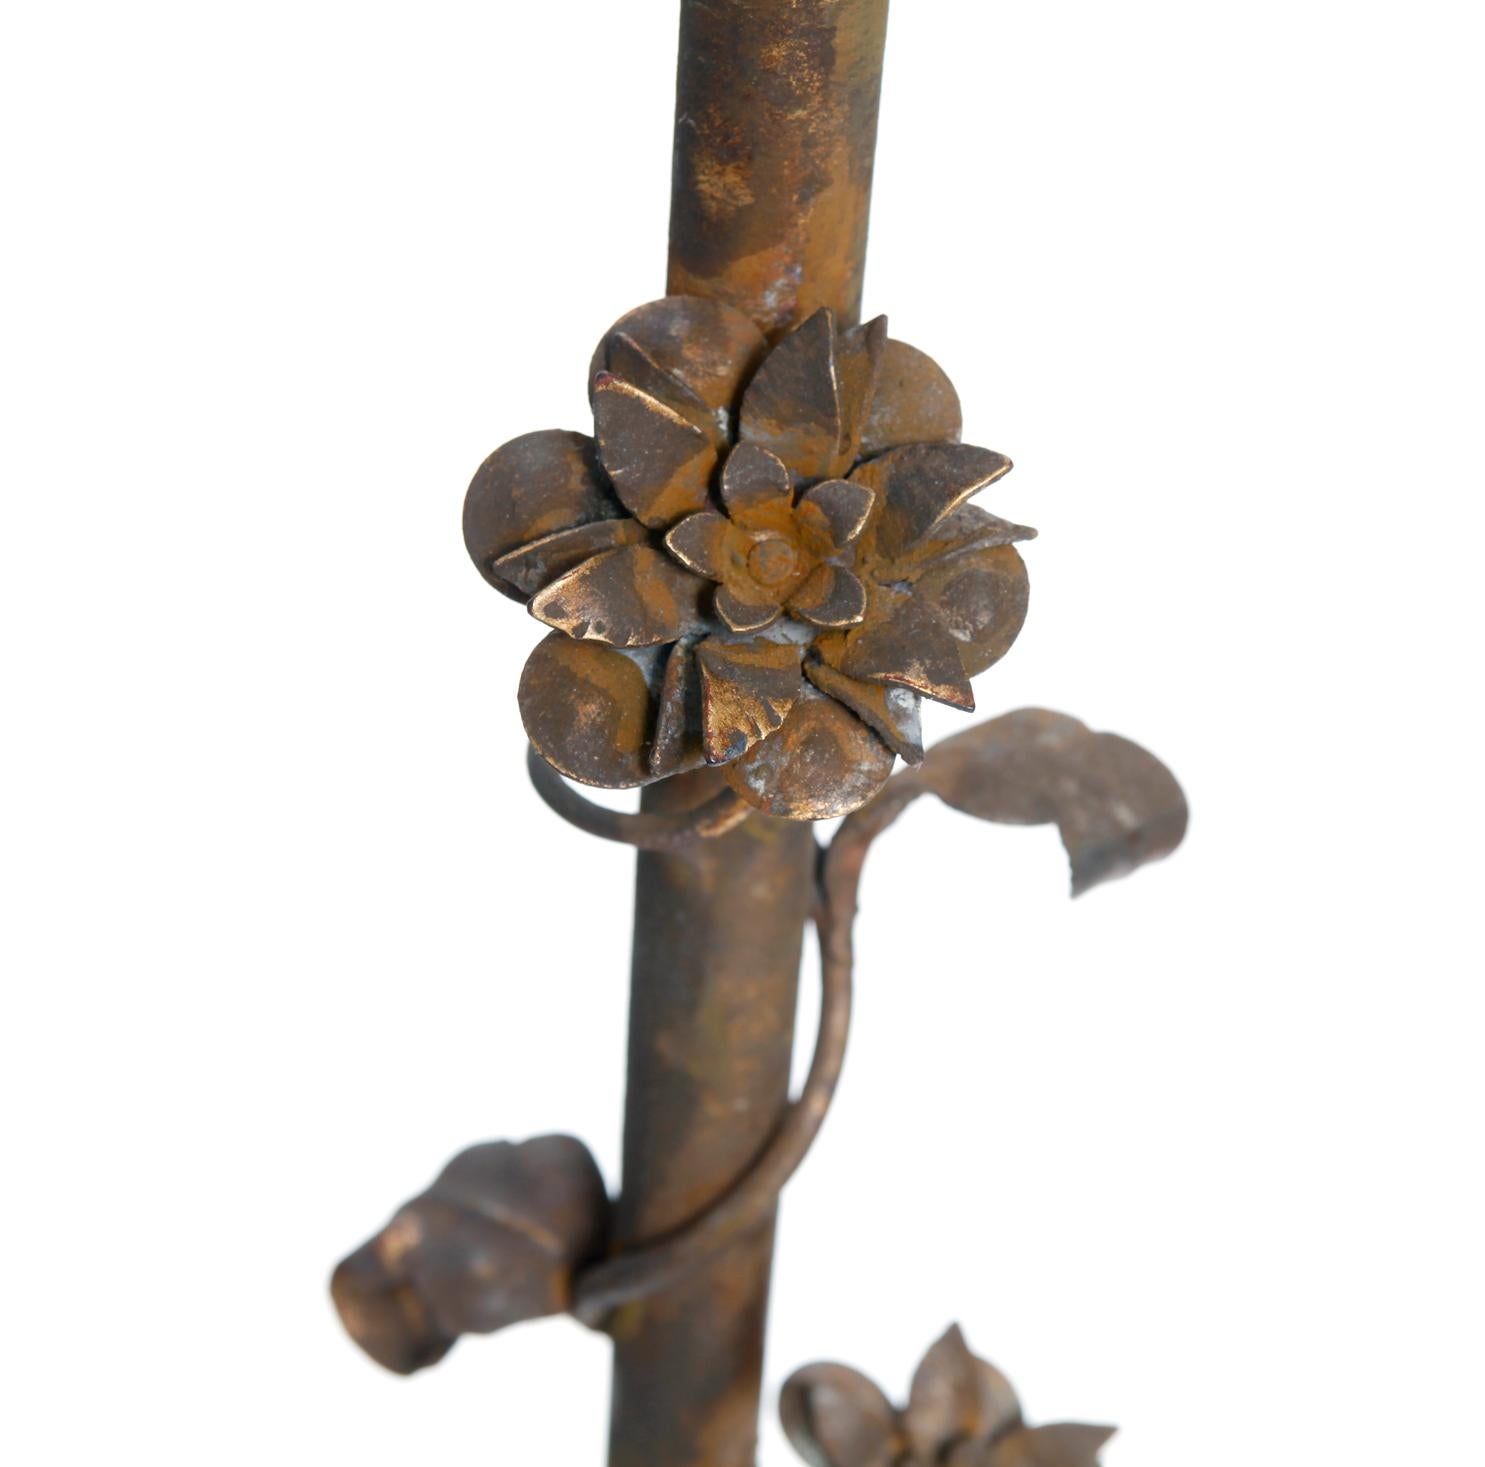 Italian Iron Floor Lamp with Patinaed Rusty Finish In Good Condition For Sale In Malibu, CA